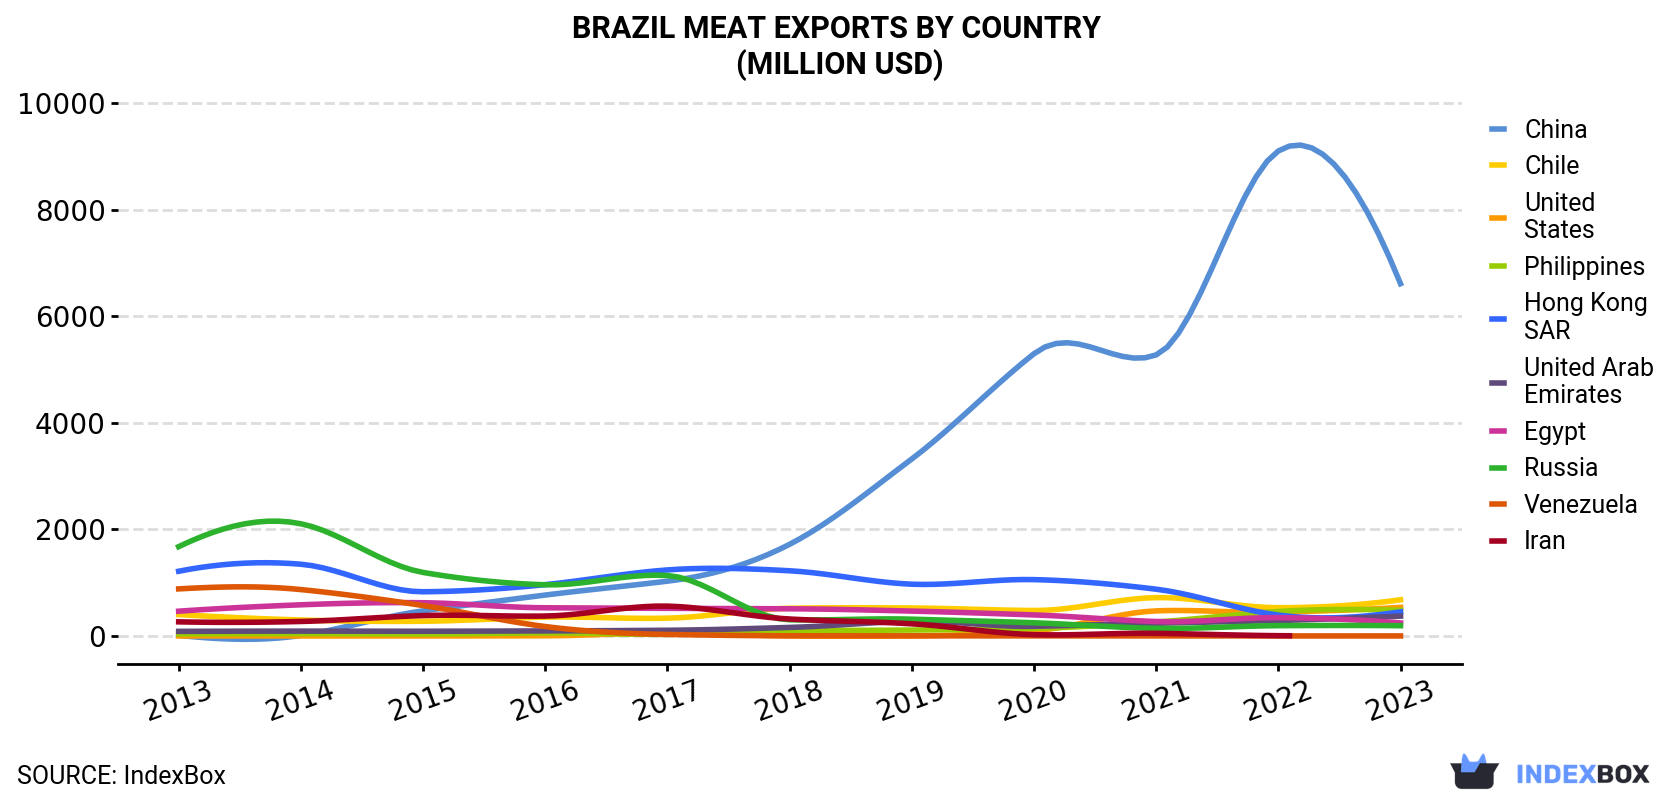 Brazil Meat Exports By Country (Million USD)